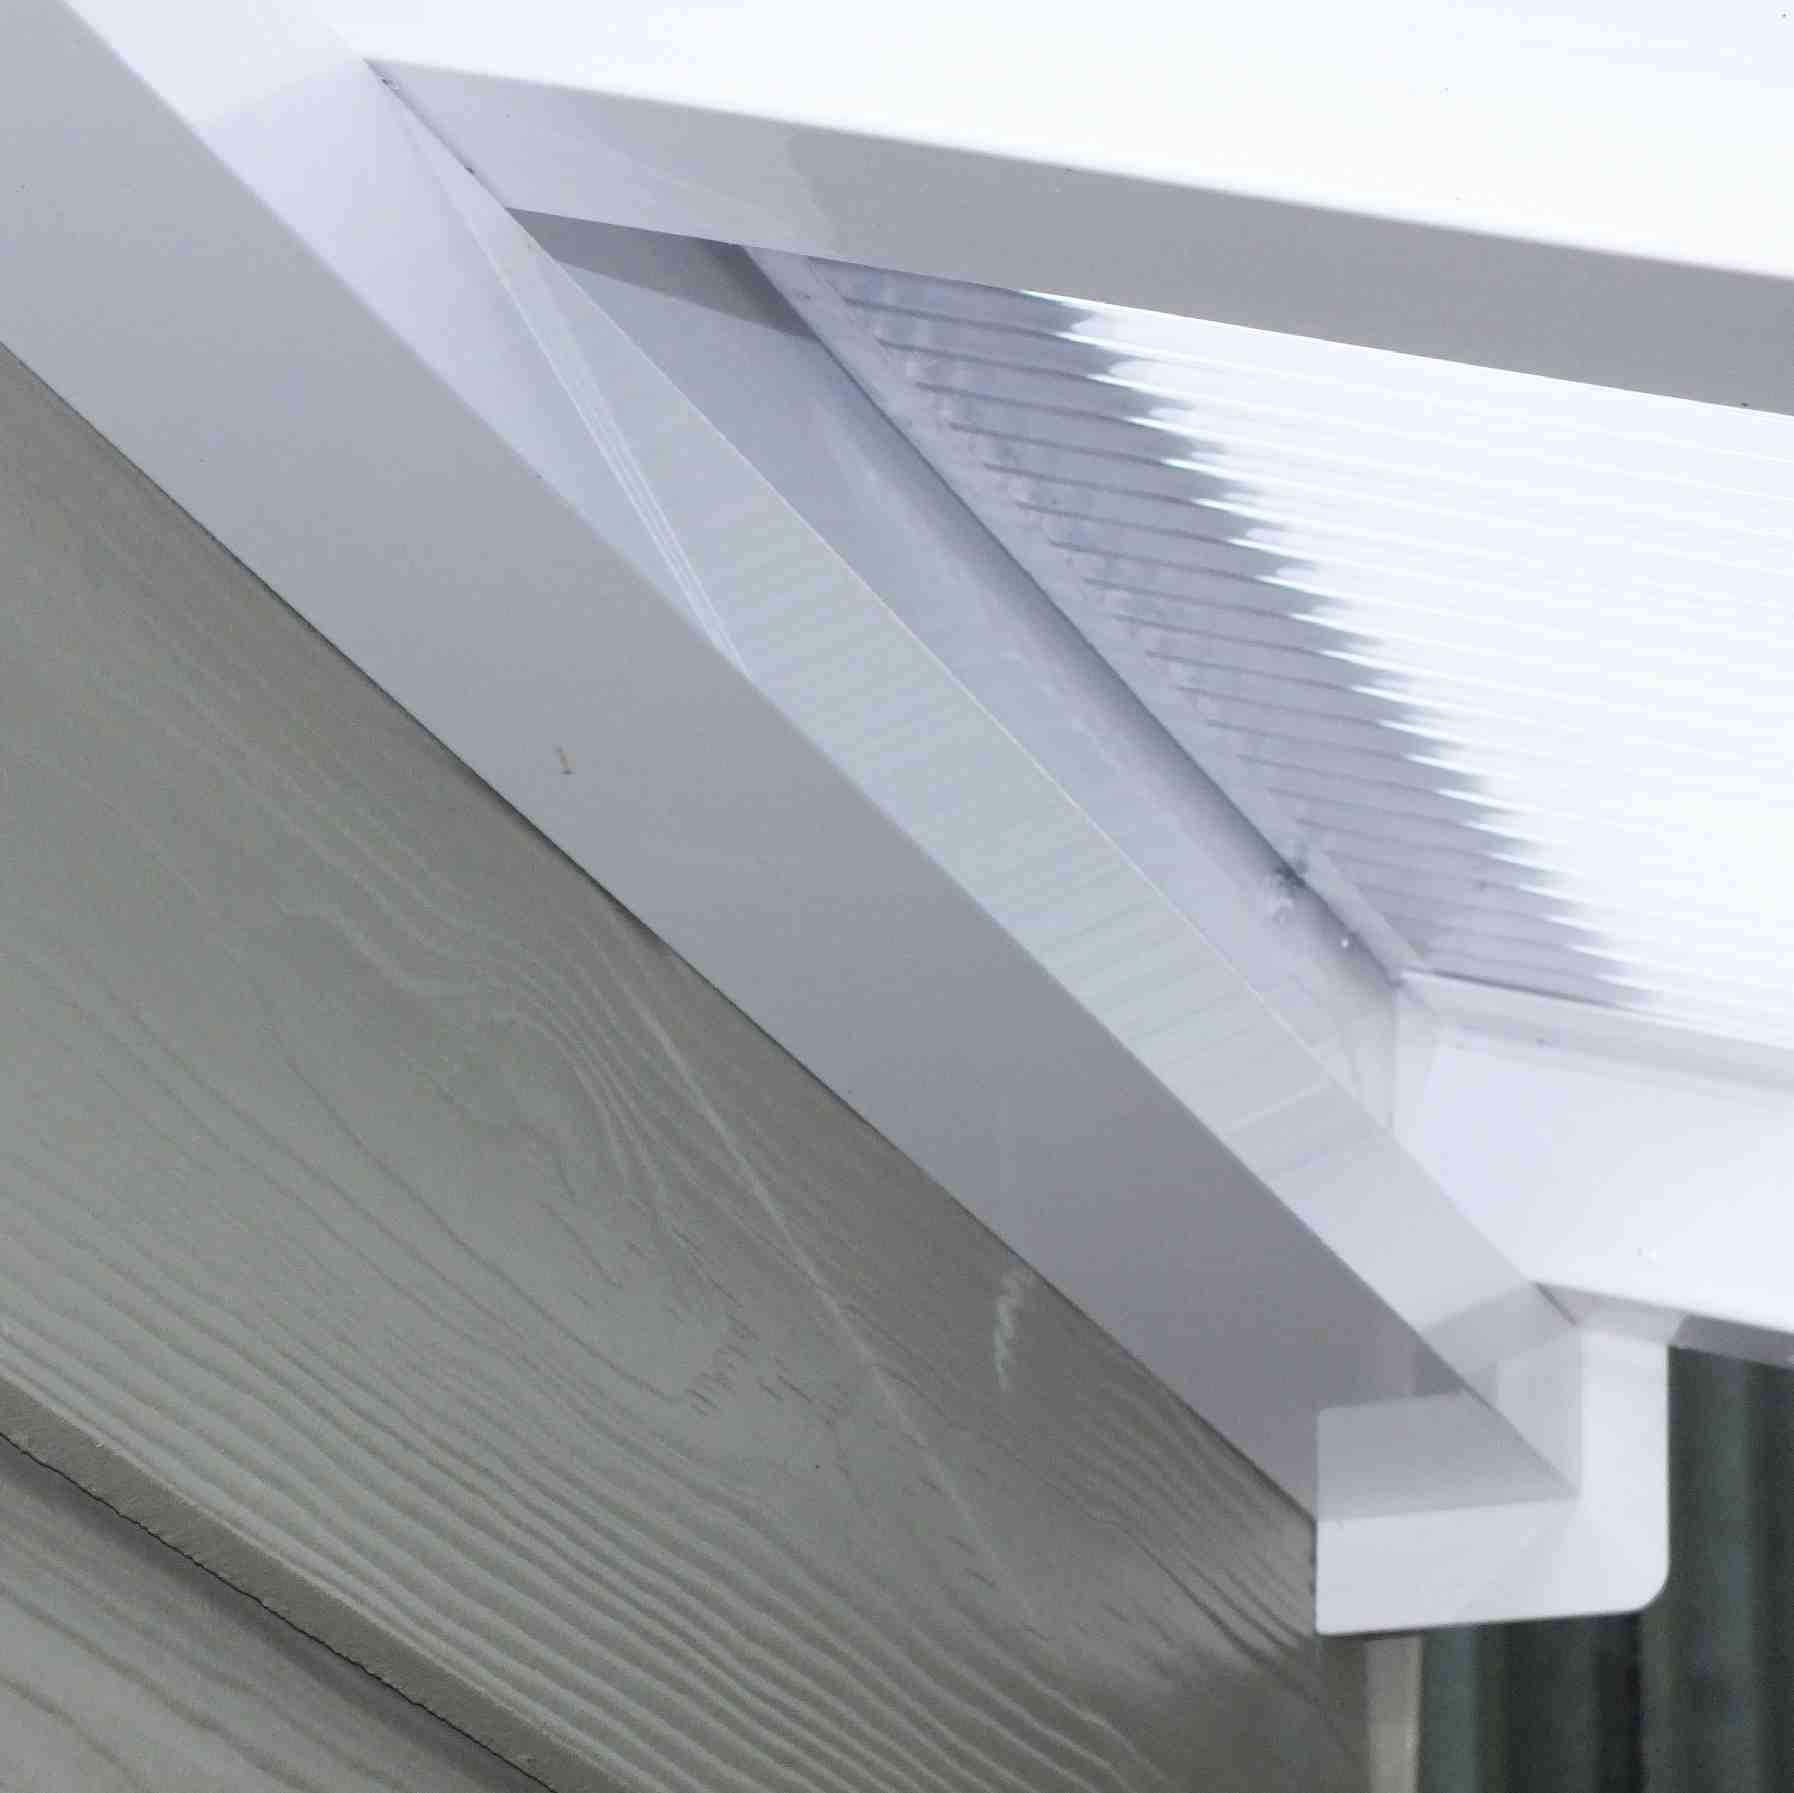 Great deals on Omega Verandah White with 16mm Polycarbonate Glazing - 9.5m (W) x 1.5m (P), (5) Supporting Posts